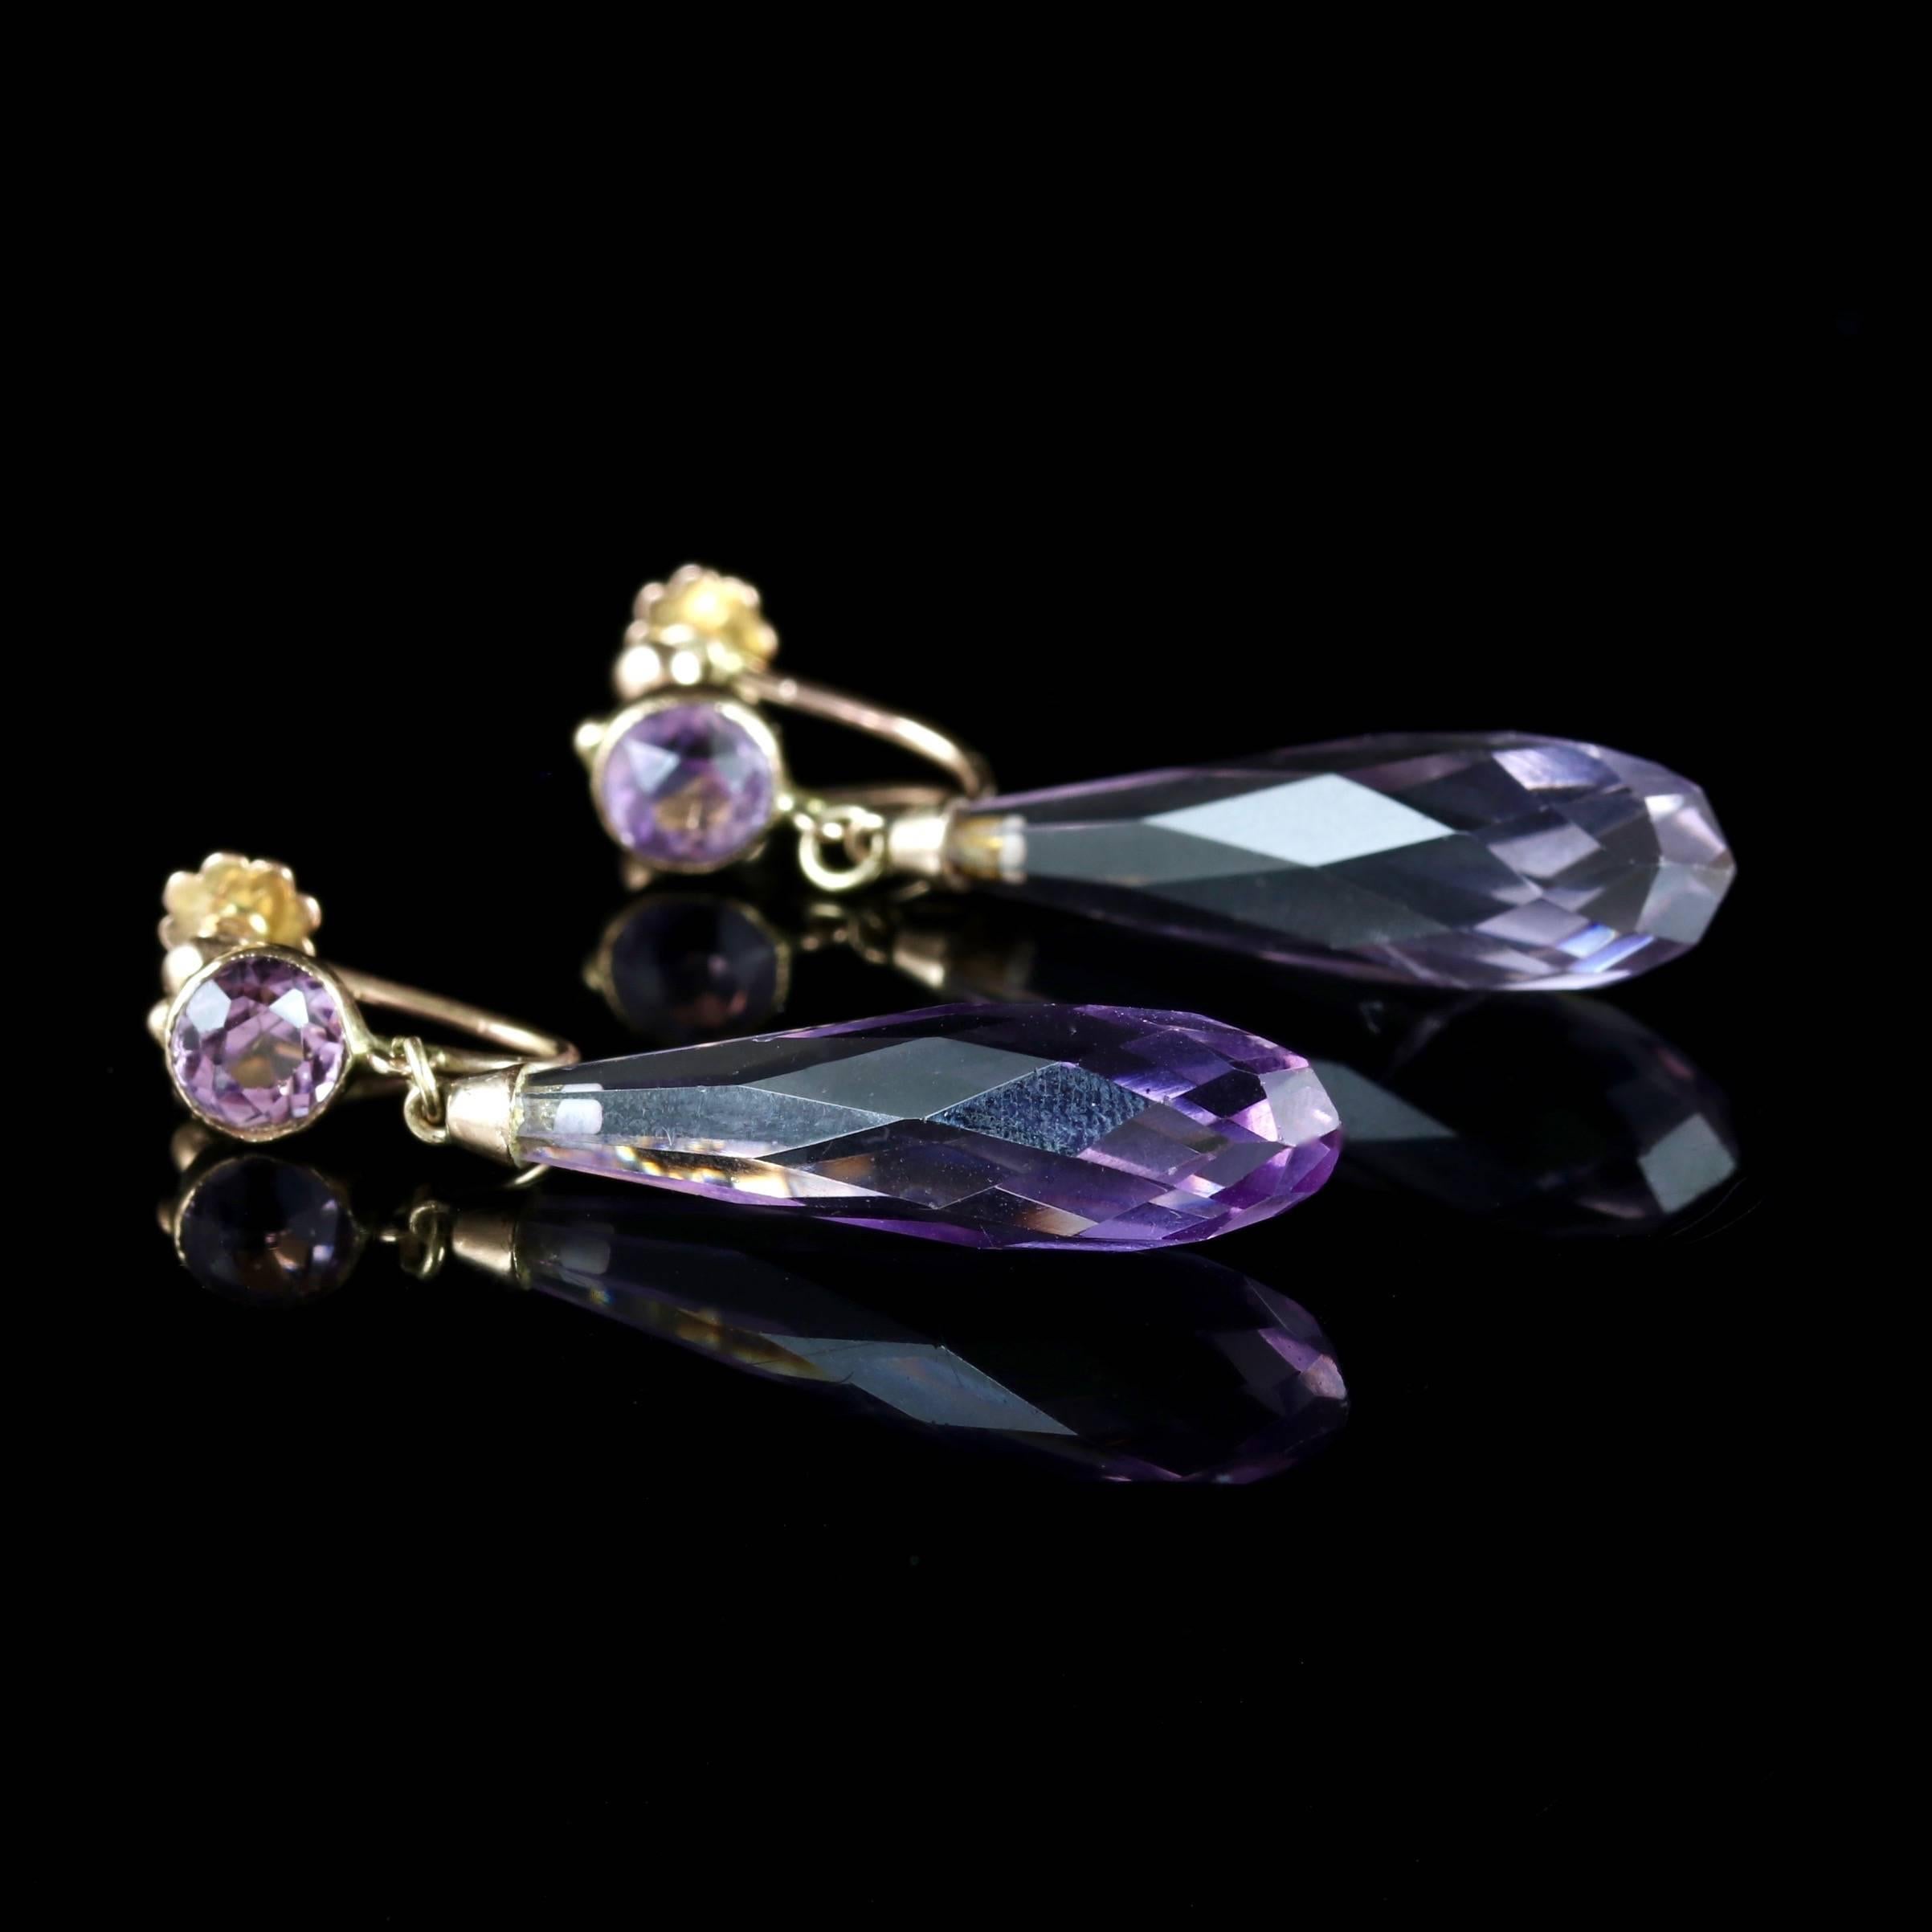 Antique Victorian Amethyst Earrings 9 Carat Gold Screw Back, circa 1900 In Excellent Condition For Sale In Lancaster, Lancashire